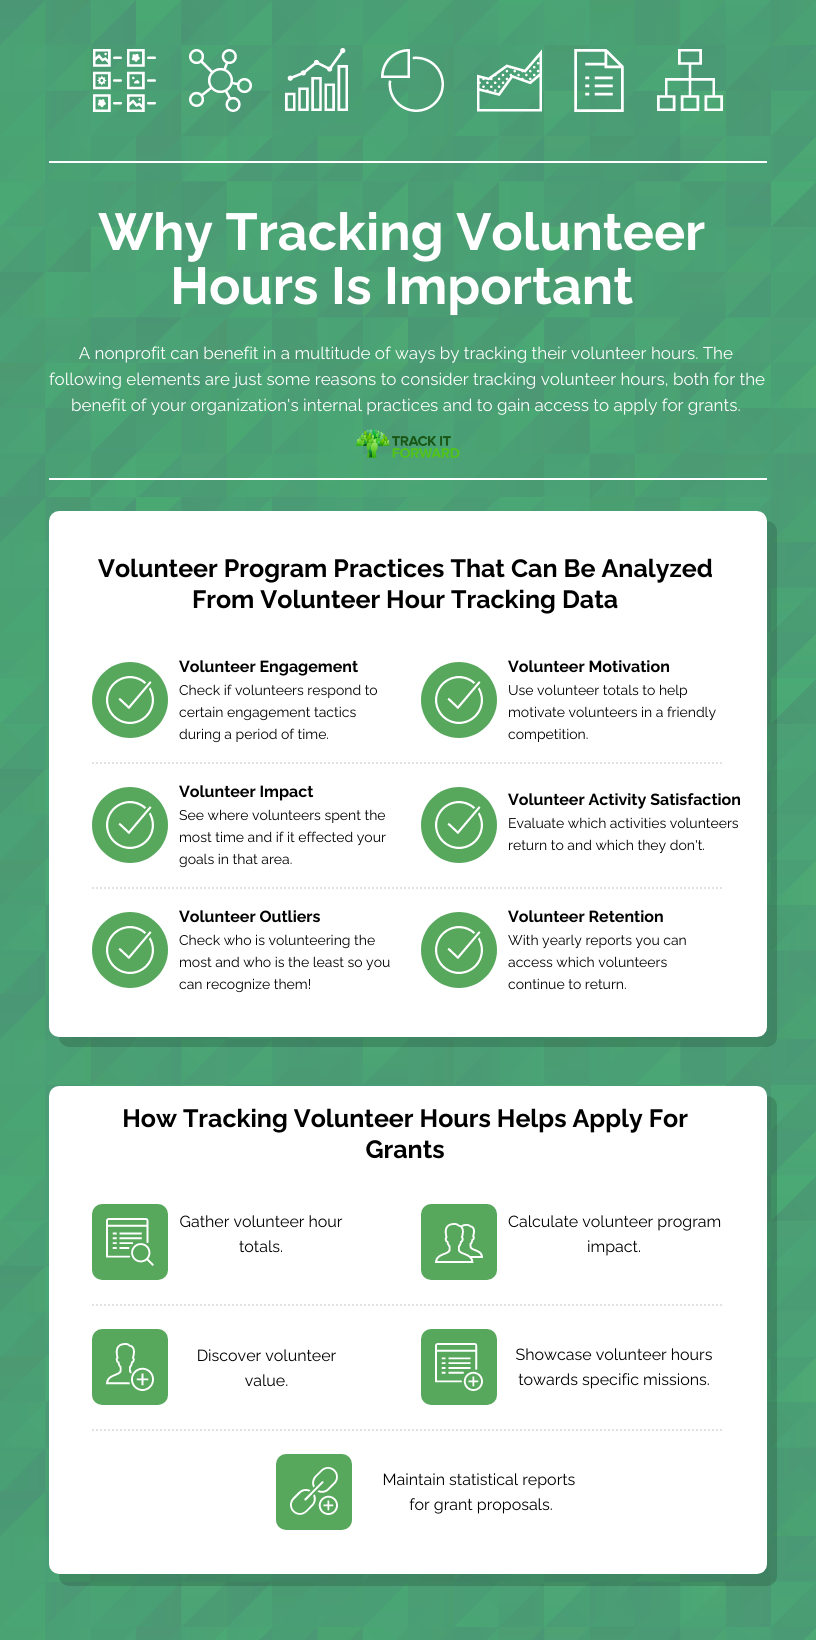 Why Tracking Volunteer Hours Is Important 

A nonprofit can benefit in a multitude of ways by tracking their volunteer hours. The following elements are just some reasons to consider tracking volunteer hours, both for the benefit of your organization's internal practices and to gain access to apply for grants. 

Volunteer Program Practices That Can Be Analyzed From Volunteer Hour Tracking Data 
Volunteer Engagement 
Check if volunteers respond to certain engagement tactics during a period of time. 

Volunteer Motivation 
Use volunteer totals to help motivate volunteers in a friendly competition. 
Volunteer Impact 
See where volunteers spent the most time and if it effected your goals in that area. 
Volunteer Activity Satisfaction
Evaluate which activities volunteers return to and which they don't. 
Volunteer Outliers 
Check who is volunteering the most and who is the least so you can recognize them! 
Volunteer Retention 
With yearly reports you can access which volunteers continue to return. 
How Tracking Volunteer Hours Helps Apply For Grants 
Gather volunteer hour totals. 
Calculate volunteer program impact. 
Discover volunteer value. 
Showcase volunteer hours towards specific missions. 
Maintain statistical reports for grant proposals.